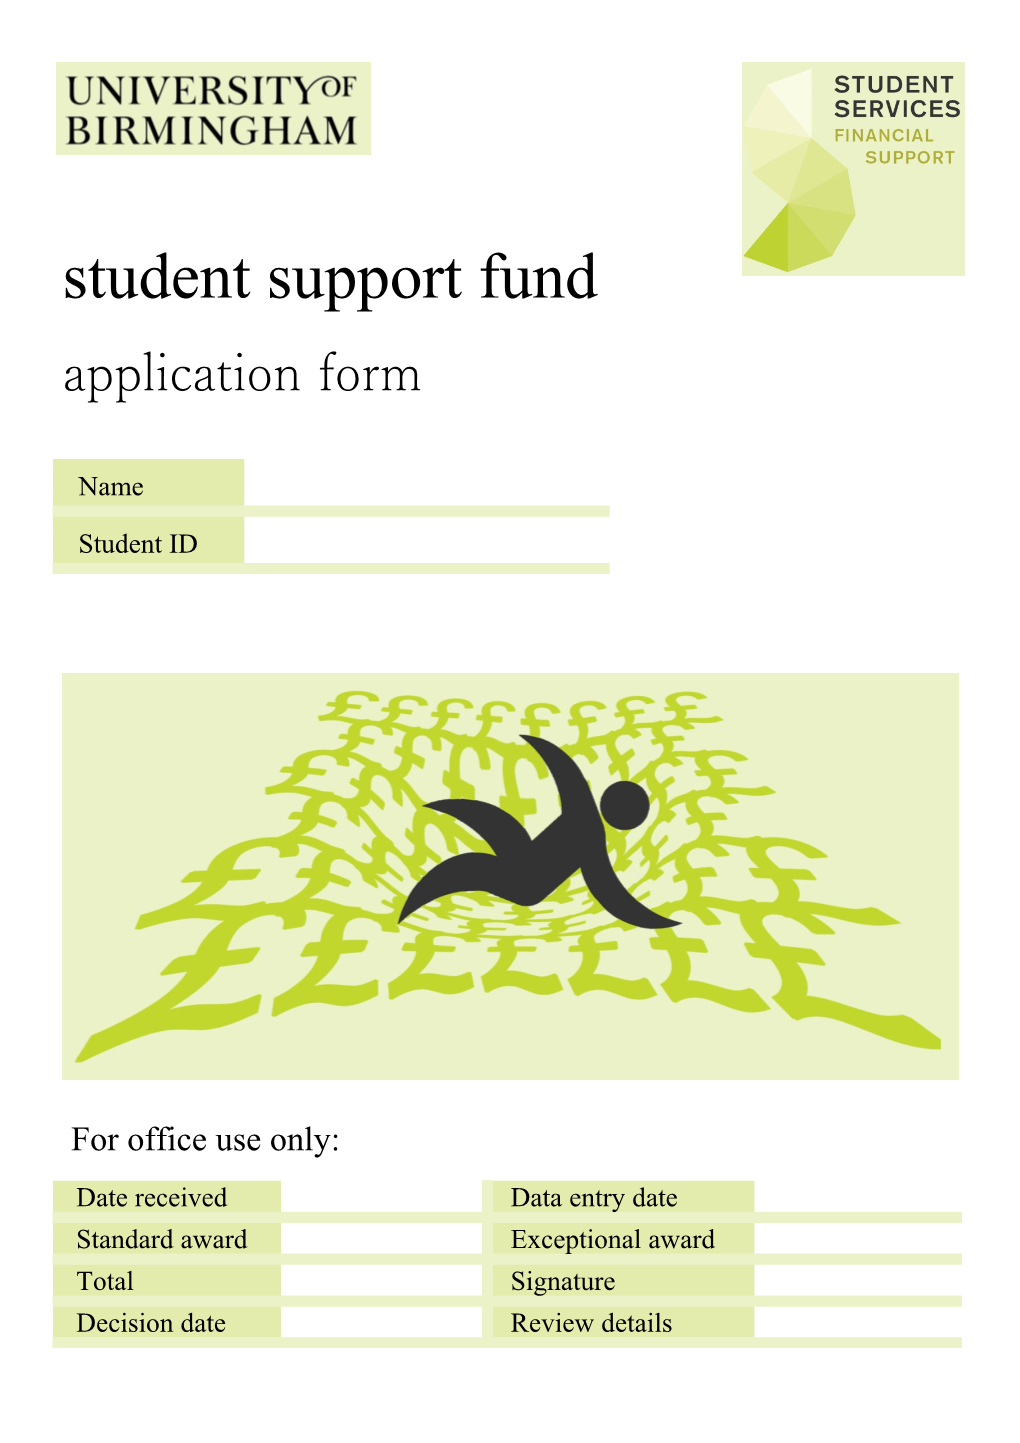 What Is the Student Support Fund?